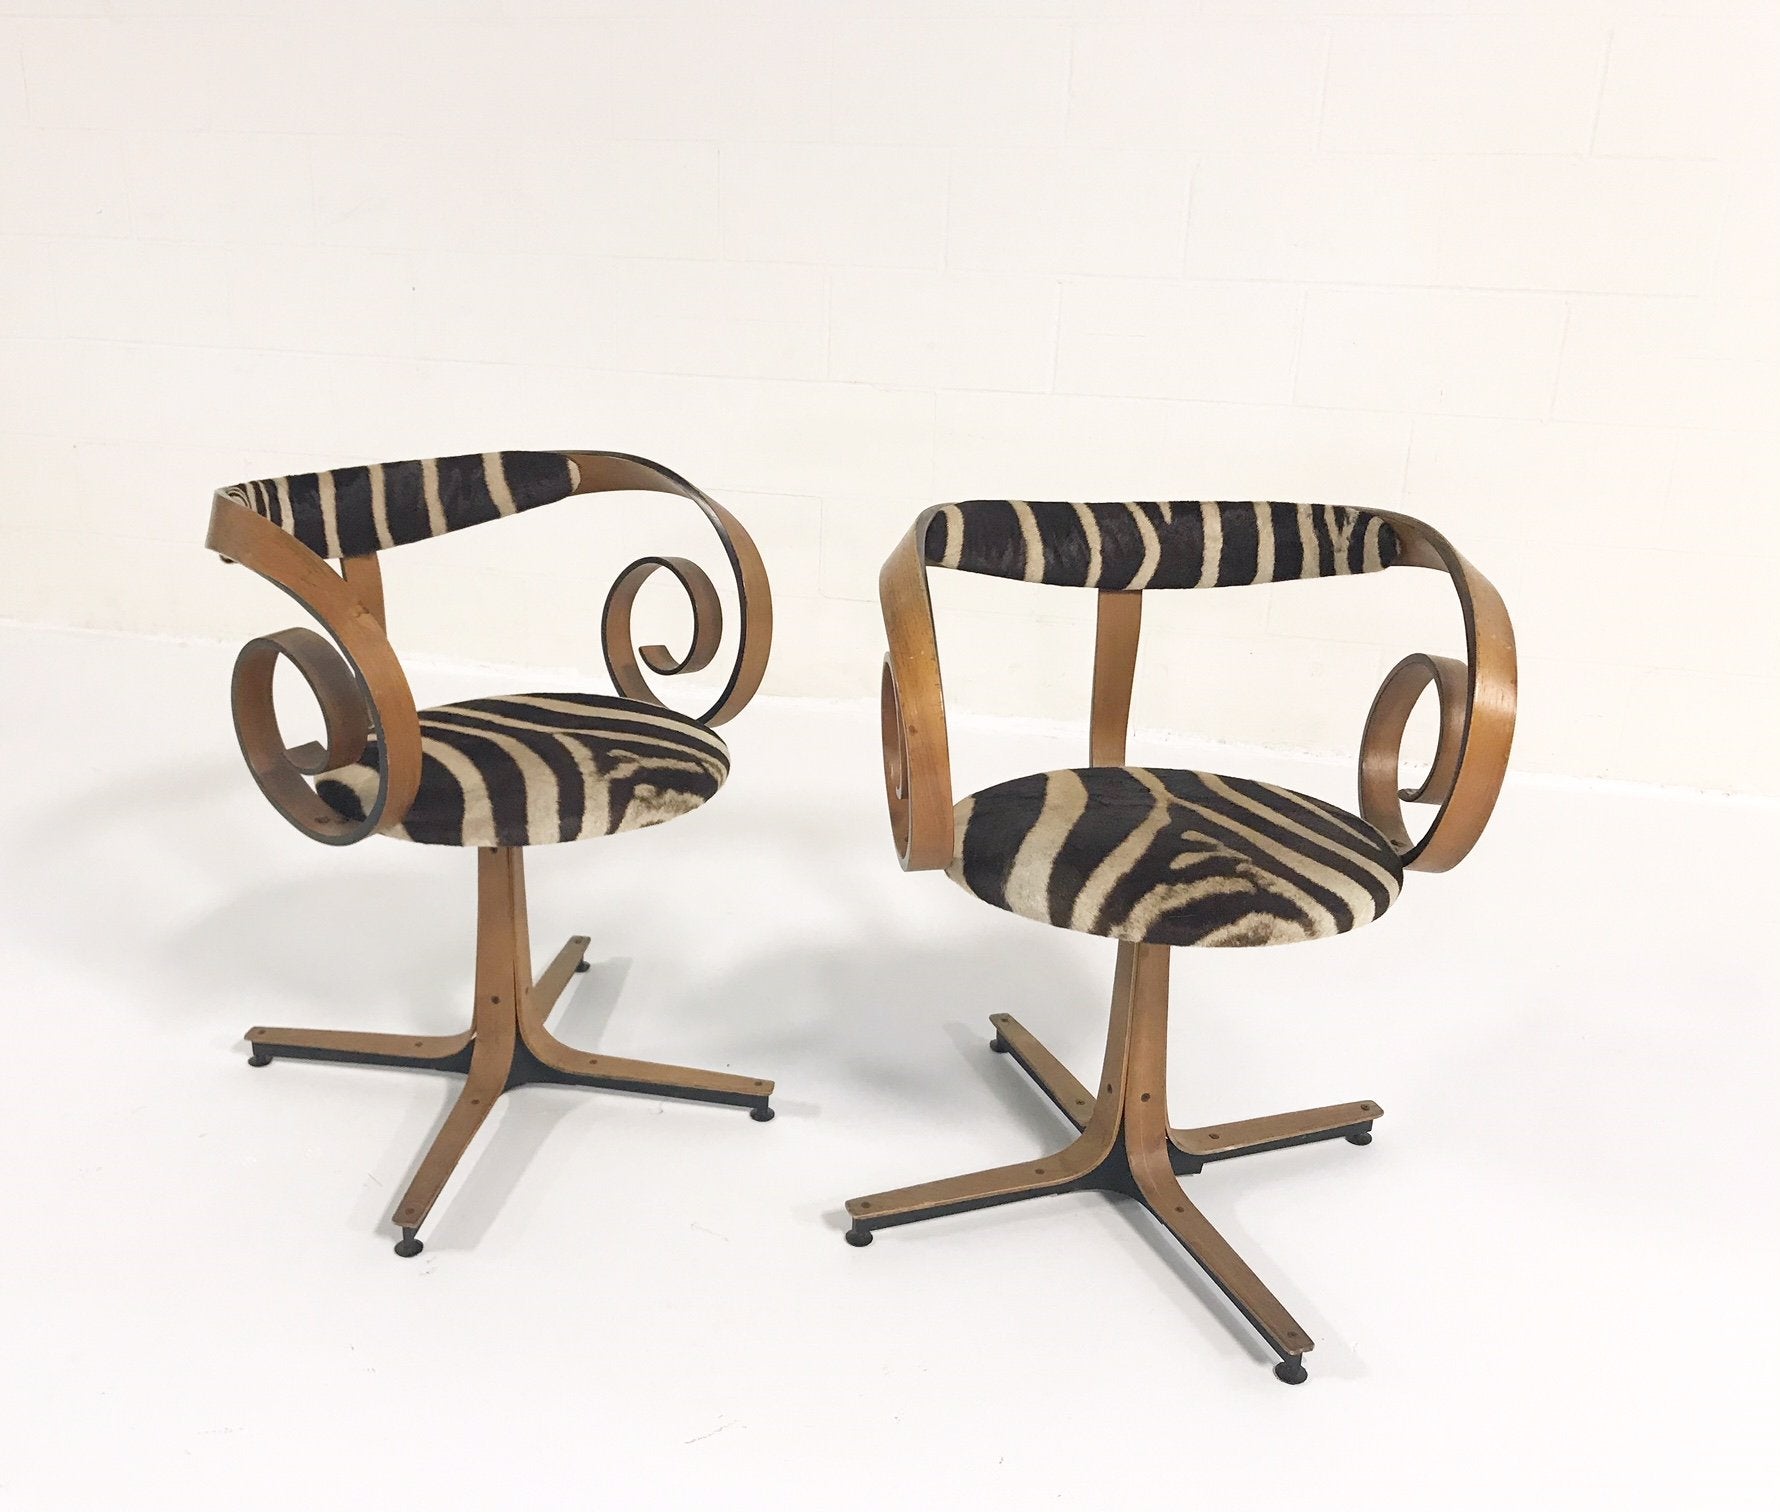 Sultana Chairs in Zebra Hide, pair - FORSYTH